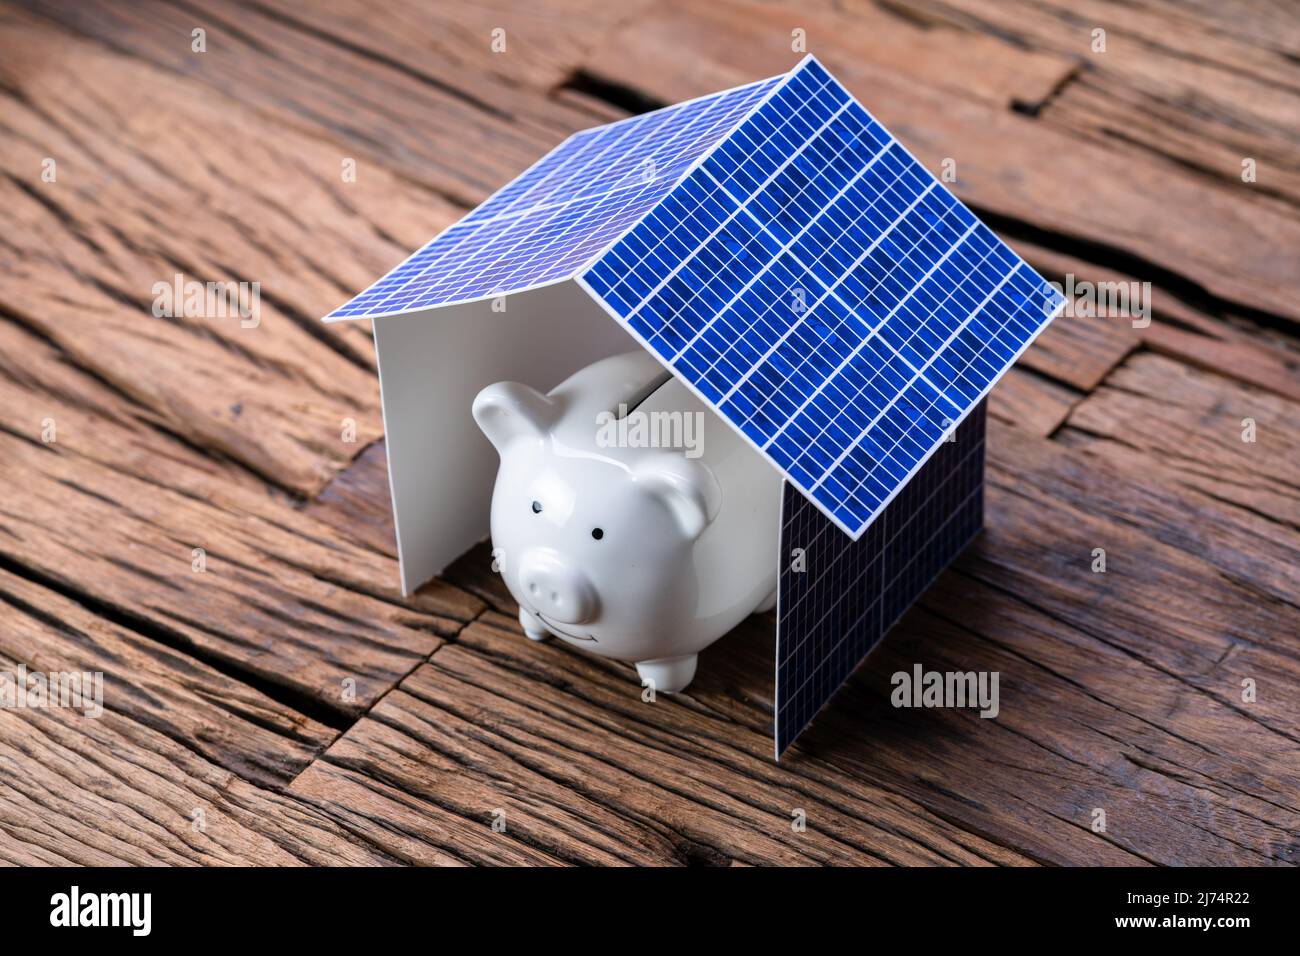 Solar Panel House Roof Real Estate Investment Stock Photo